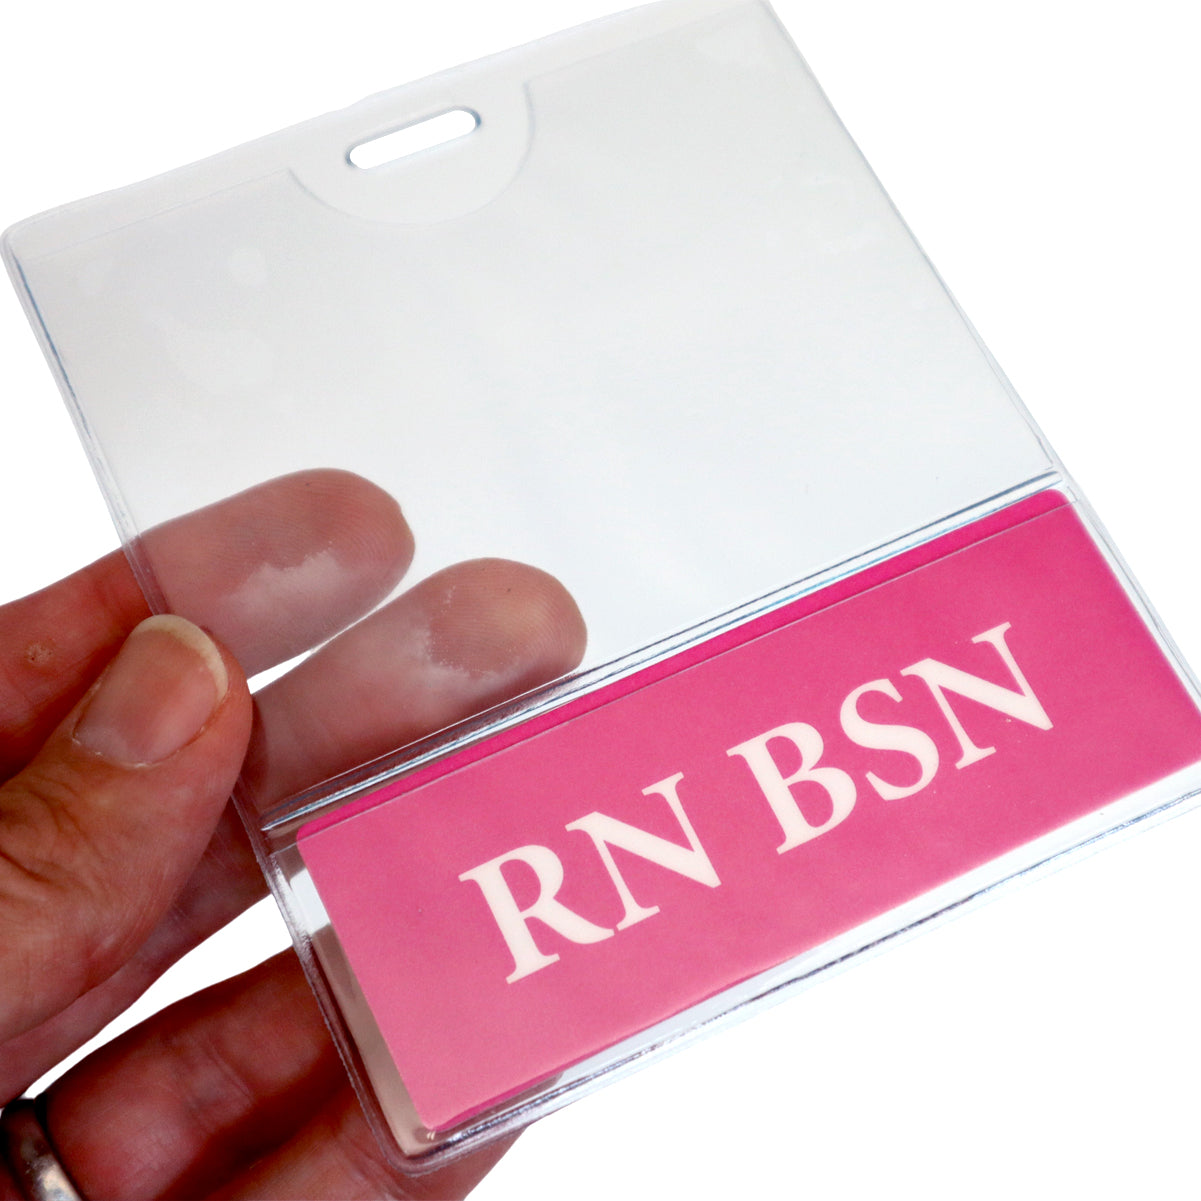 RN BSN BadgeBottoms 2 in 1 Badge Buddy and ID Badge Holder horizontal - Vinyl Sleeve for ID Card and Badge Bottom for Role Tag - Double Sided Print (hot pink)